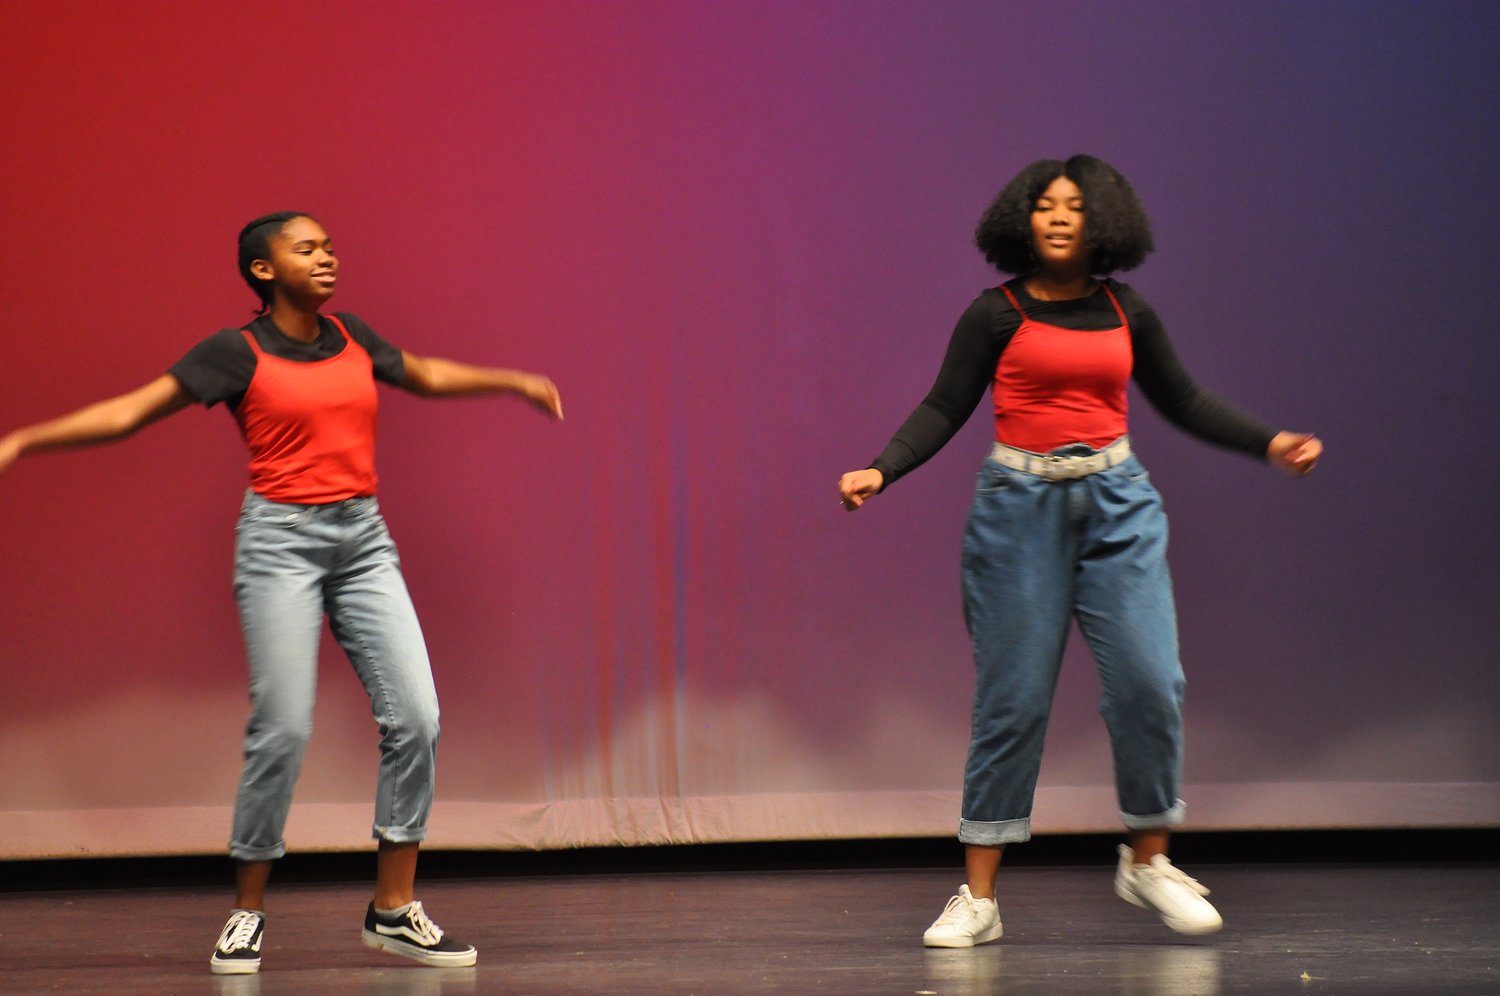 Kazziah Hayes and Domminique Hall perform a rendition of 1990s R&B star Montell Jordan's "This Is How We Do It" Saturday in the MoCo's Got Talent for Scholarships competition at Crawfordsville High School. The group received honorable mention at the alumni association fundraiser.